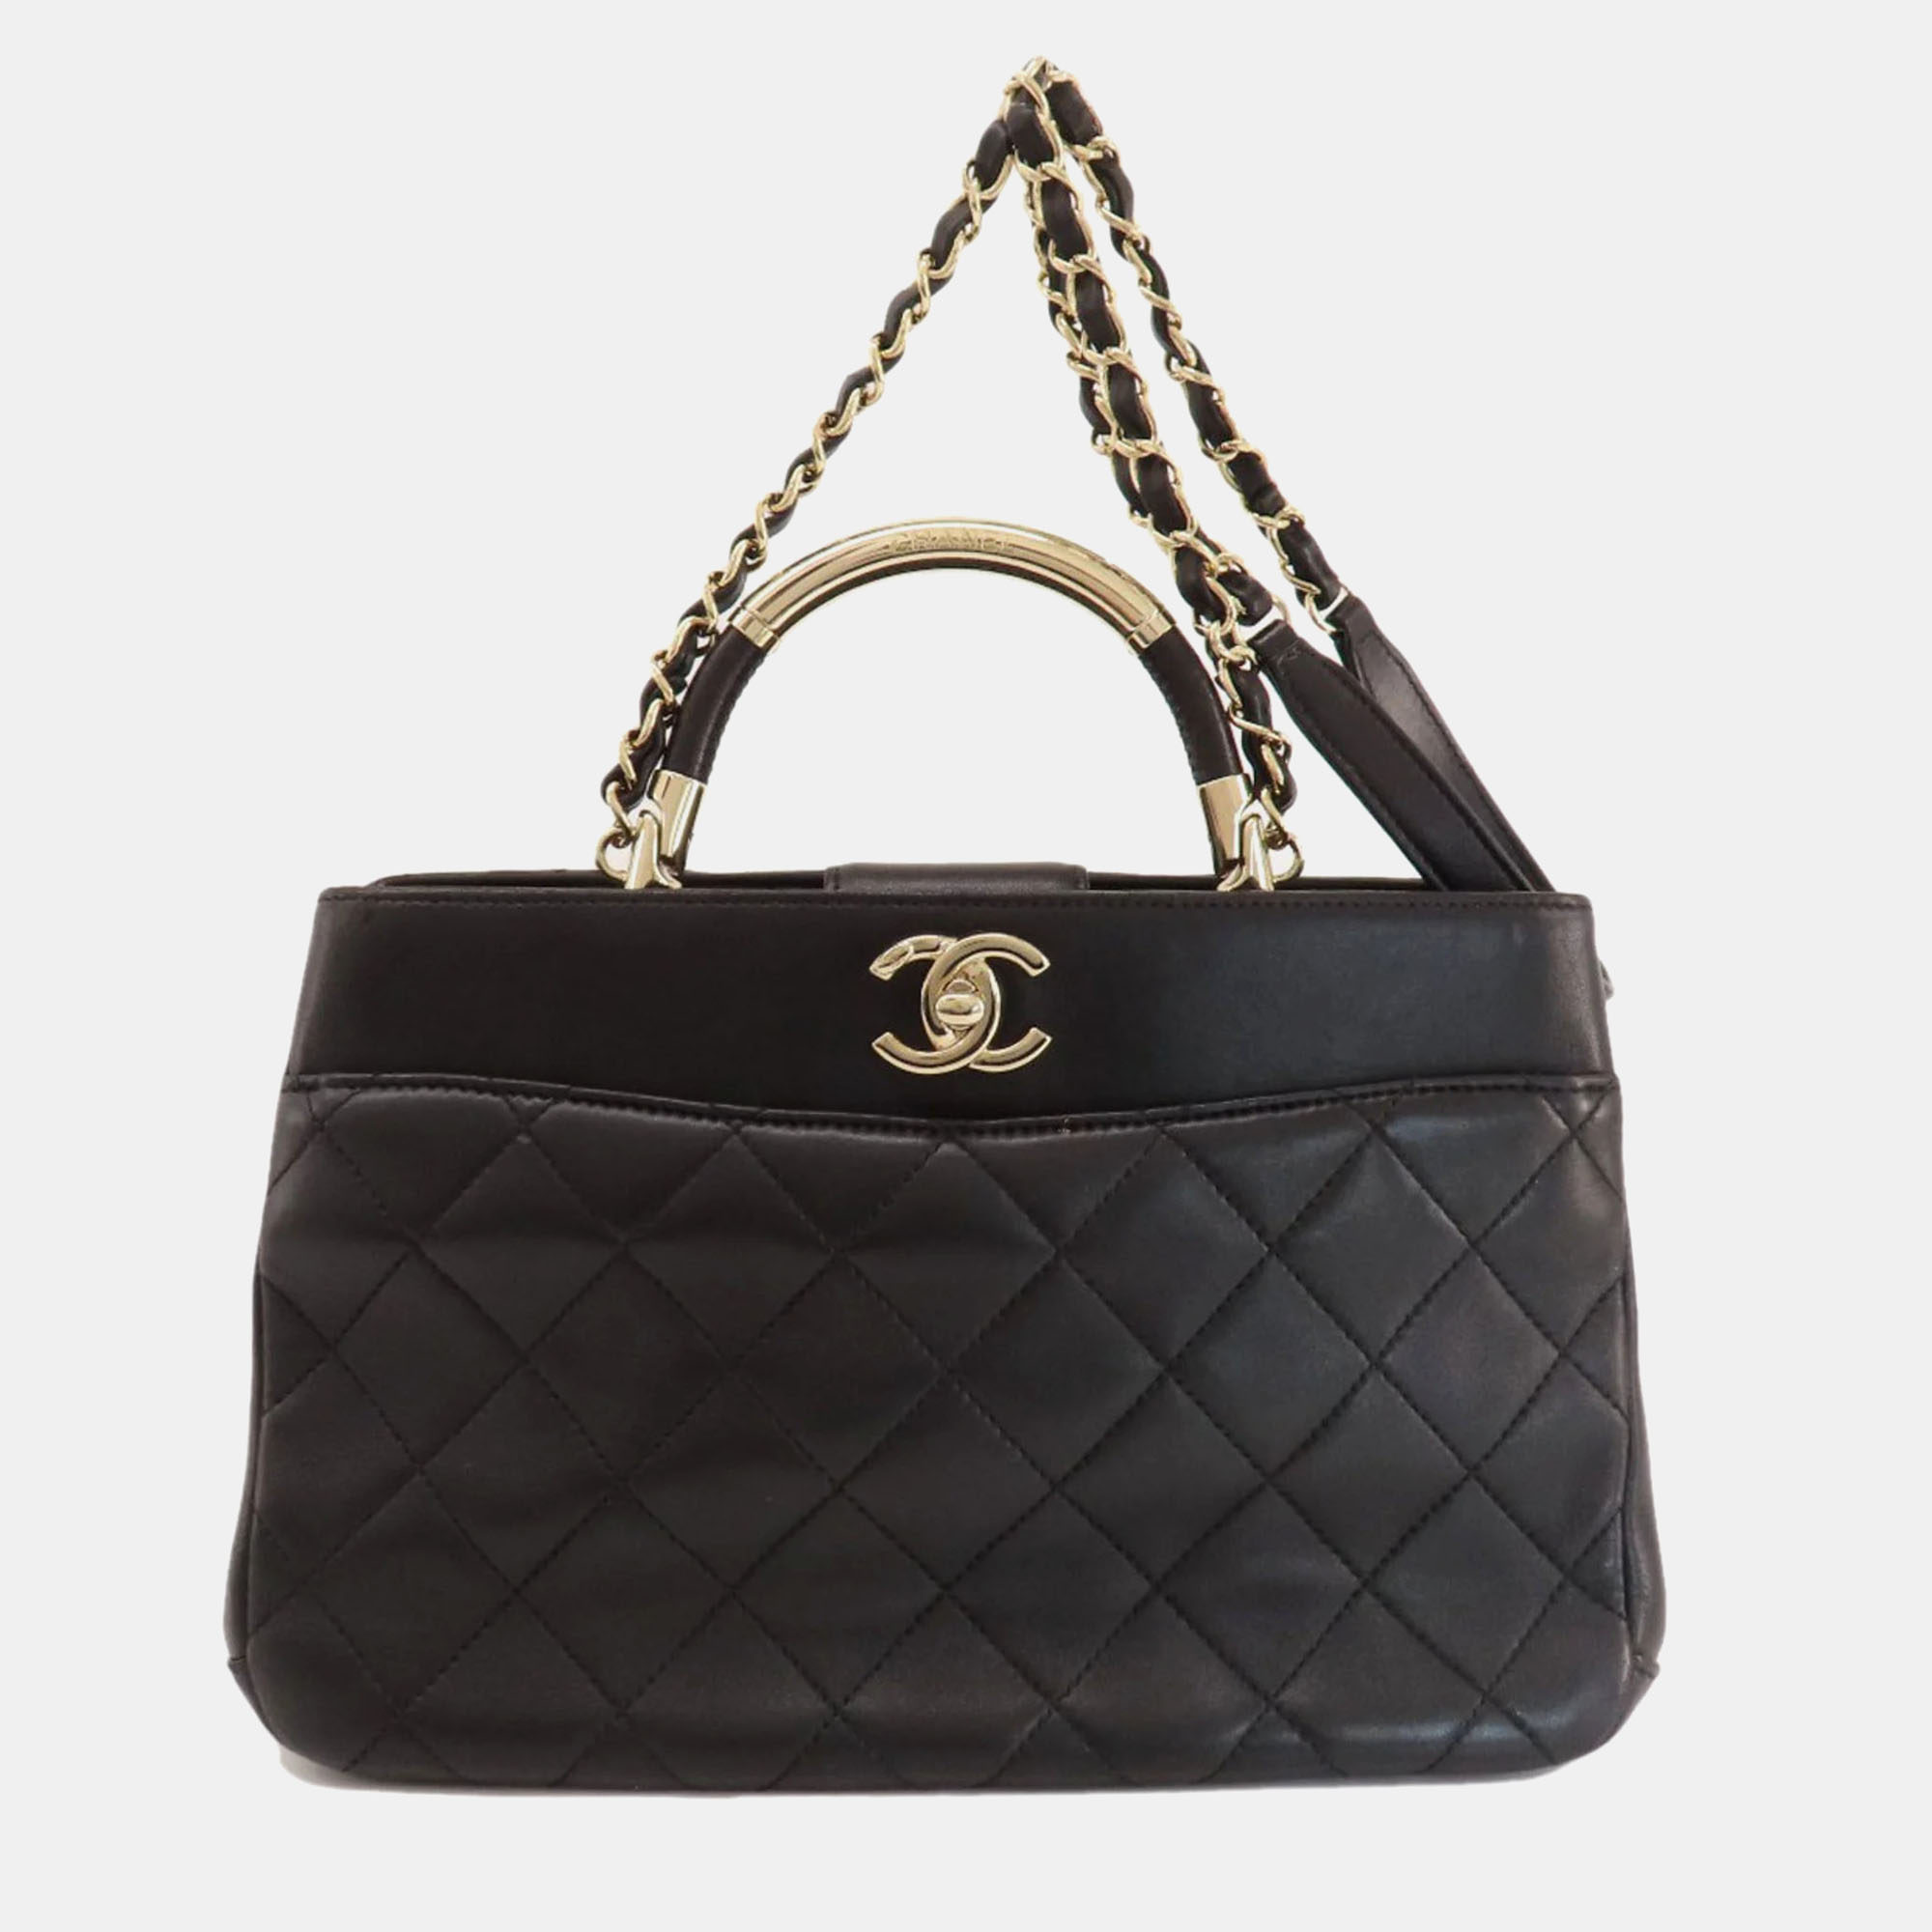 

Chanel Black Quilted Leather CC Top Handle Tote Bag